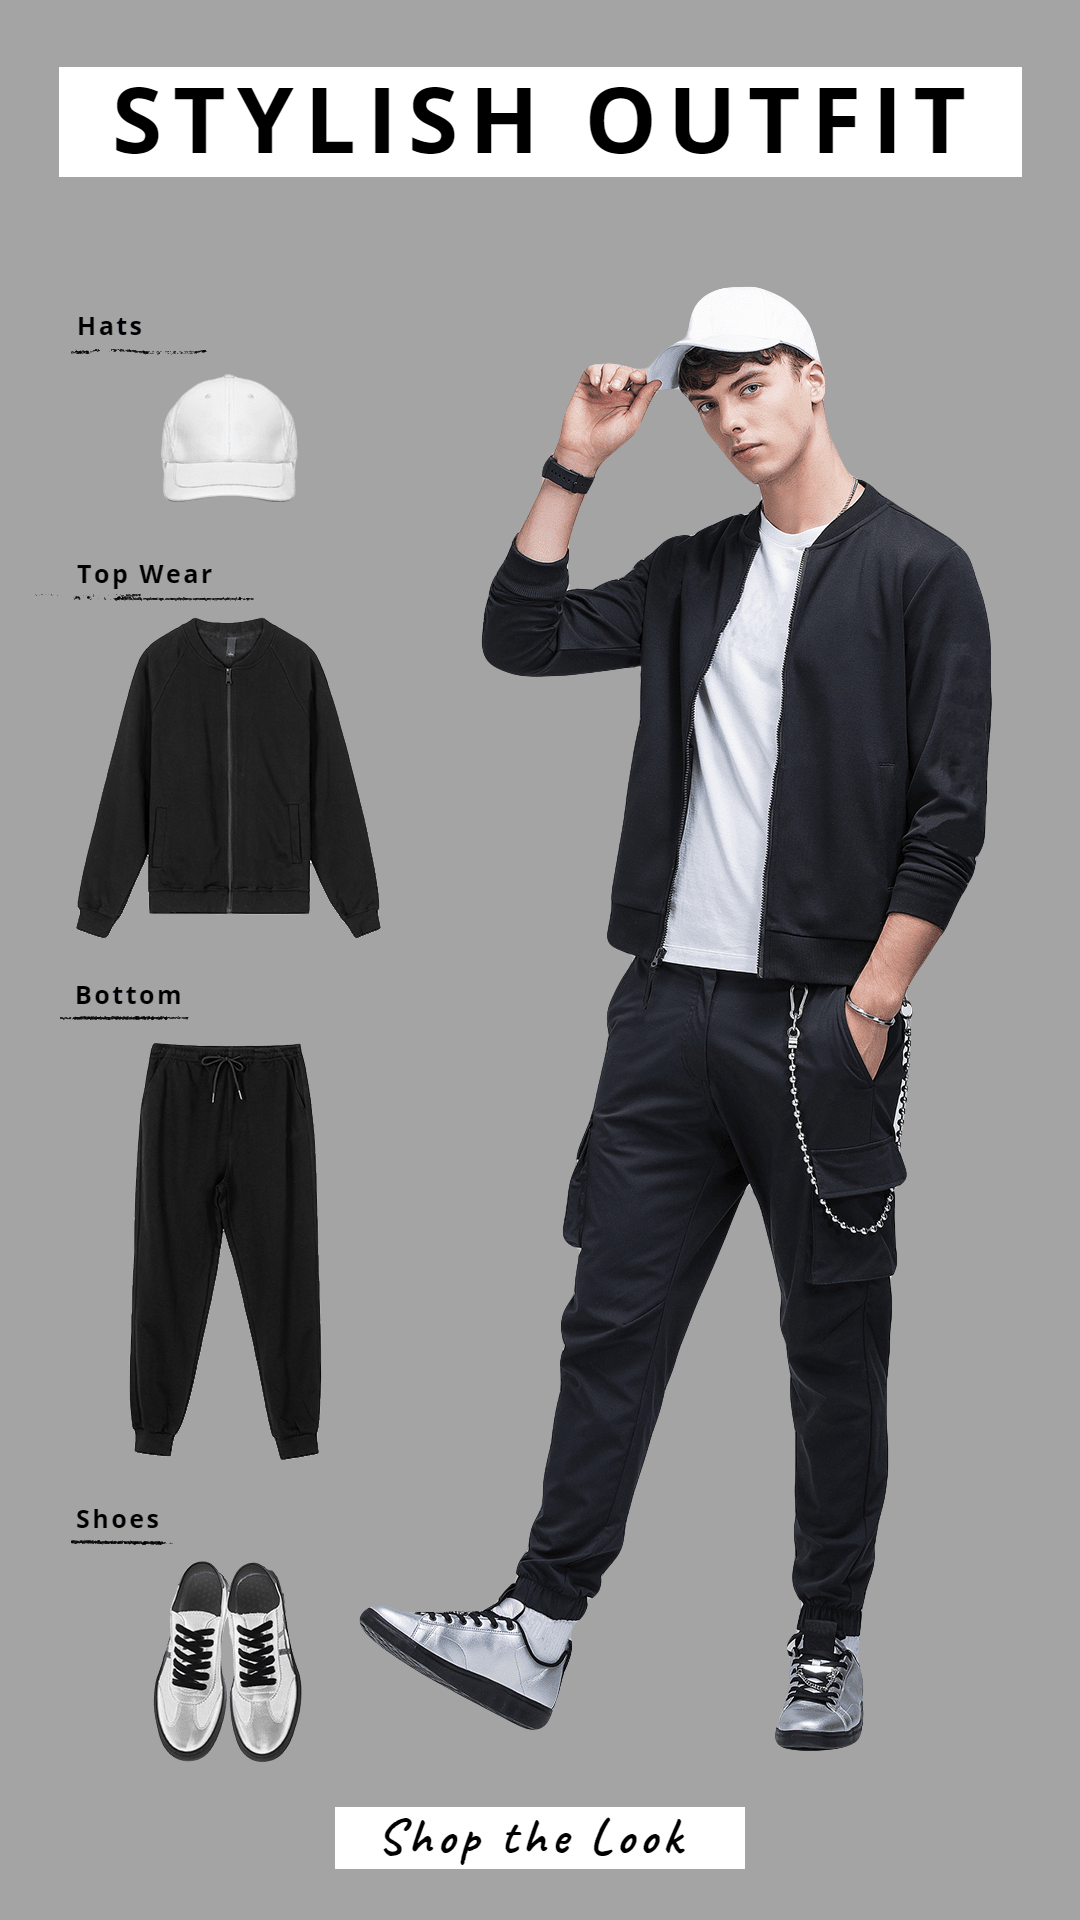 Fashion Men's Stylish Outfit Display Ecommerce Story预览效果